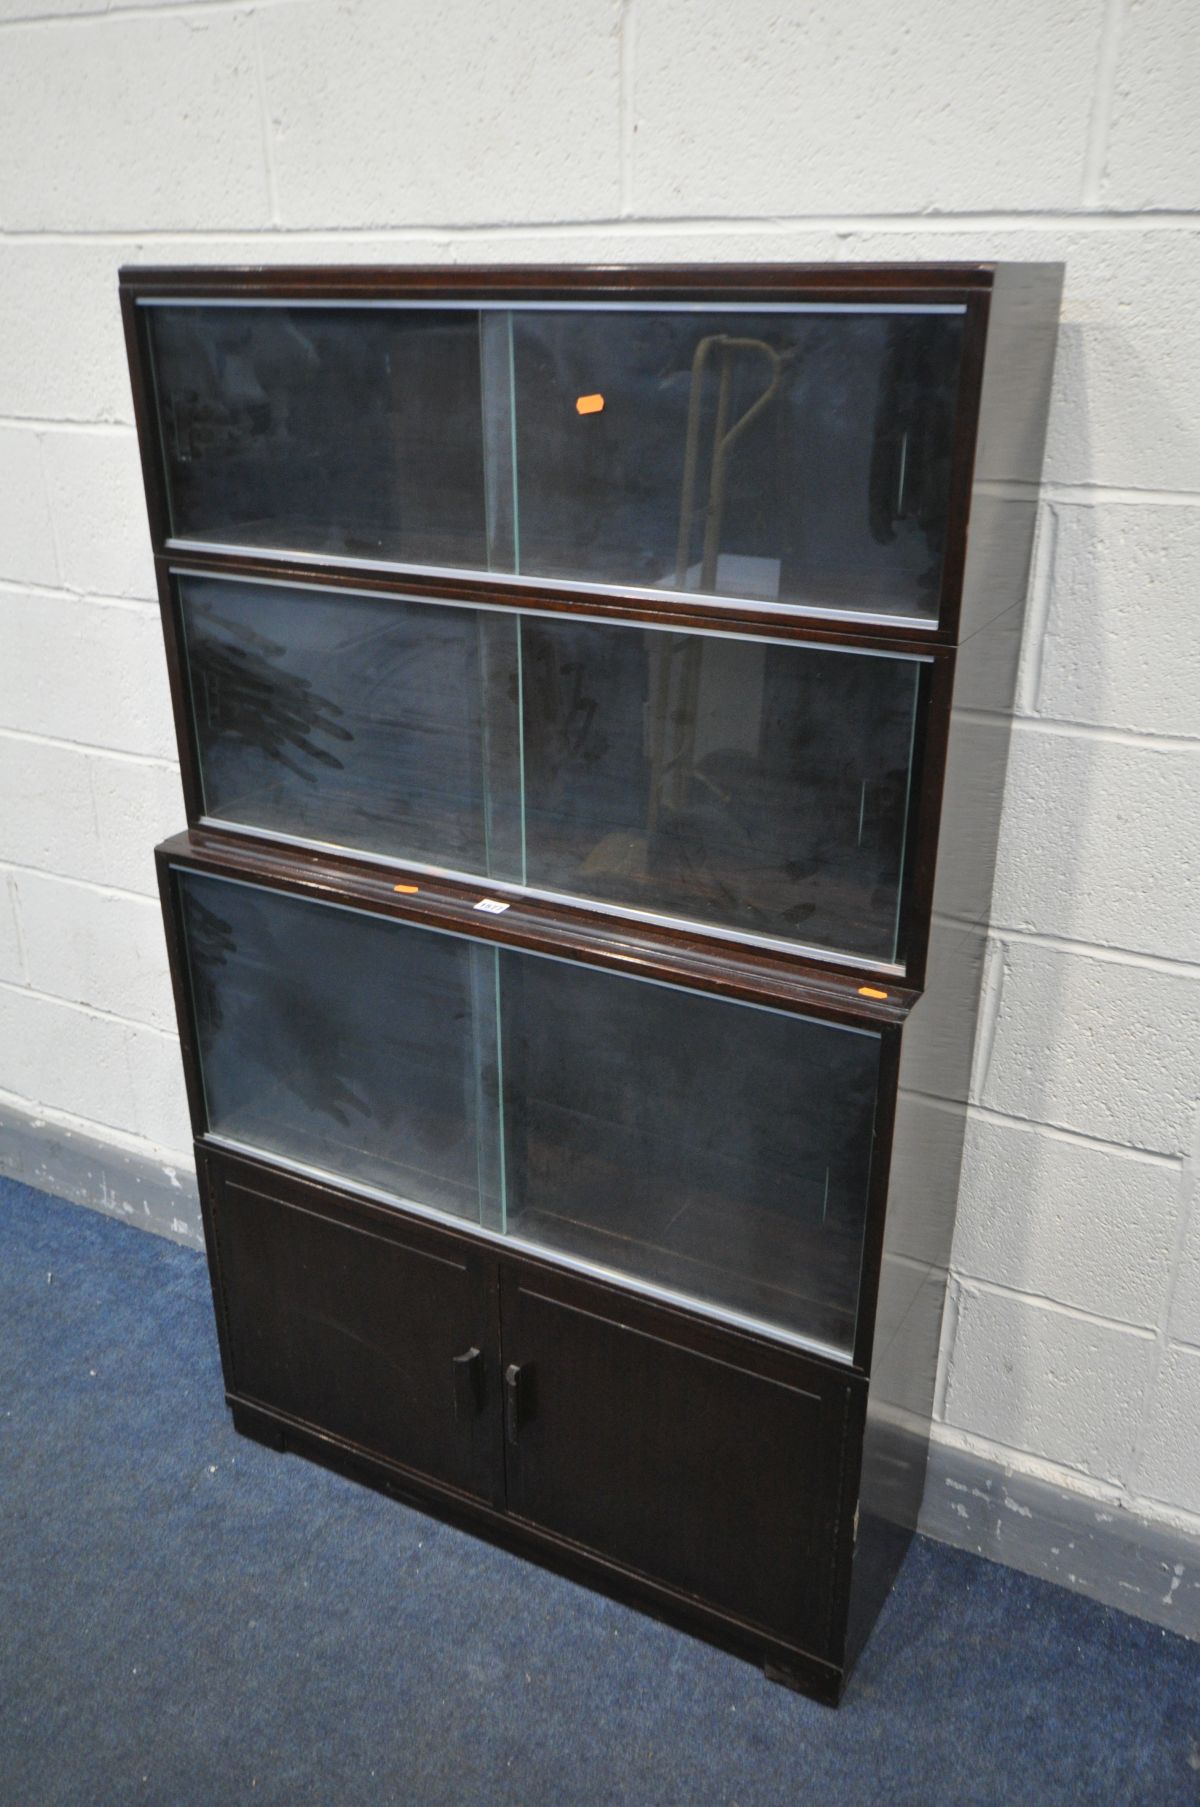 A MINTY MAHOGANY FOUR SECTION BOOKCASE, the top three sections with glazed doors, the bottom section